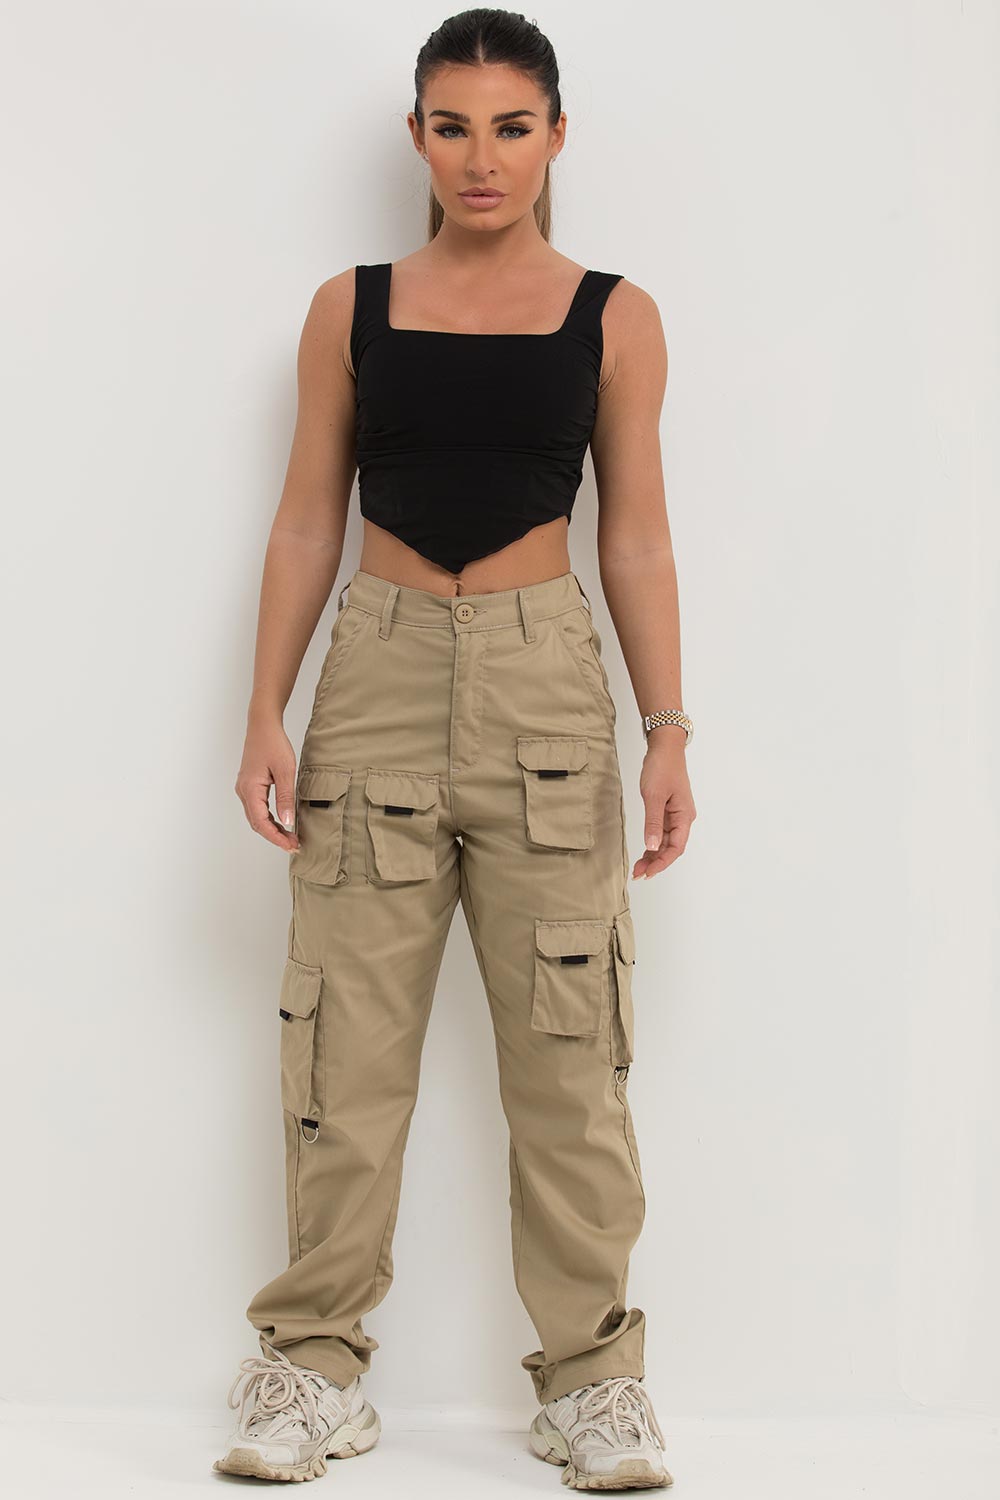 La Mode Black Drawstring-Accent Straight-Leg Cargo Pants - Women | Best  Price and Reviews | Zulily